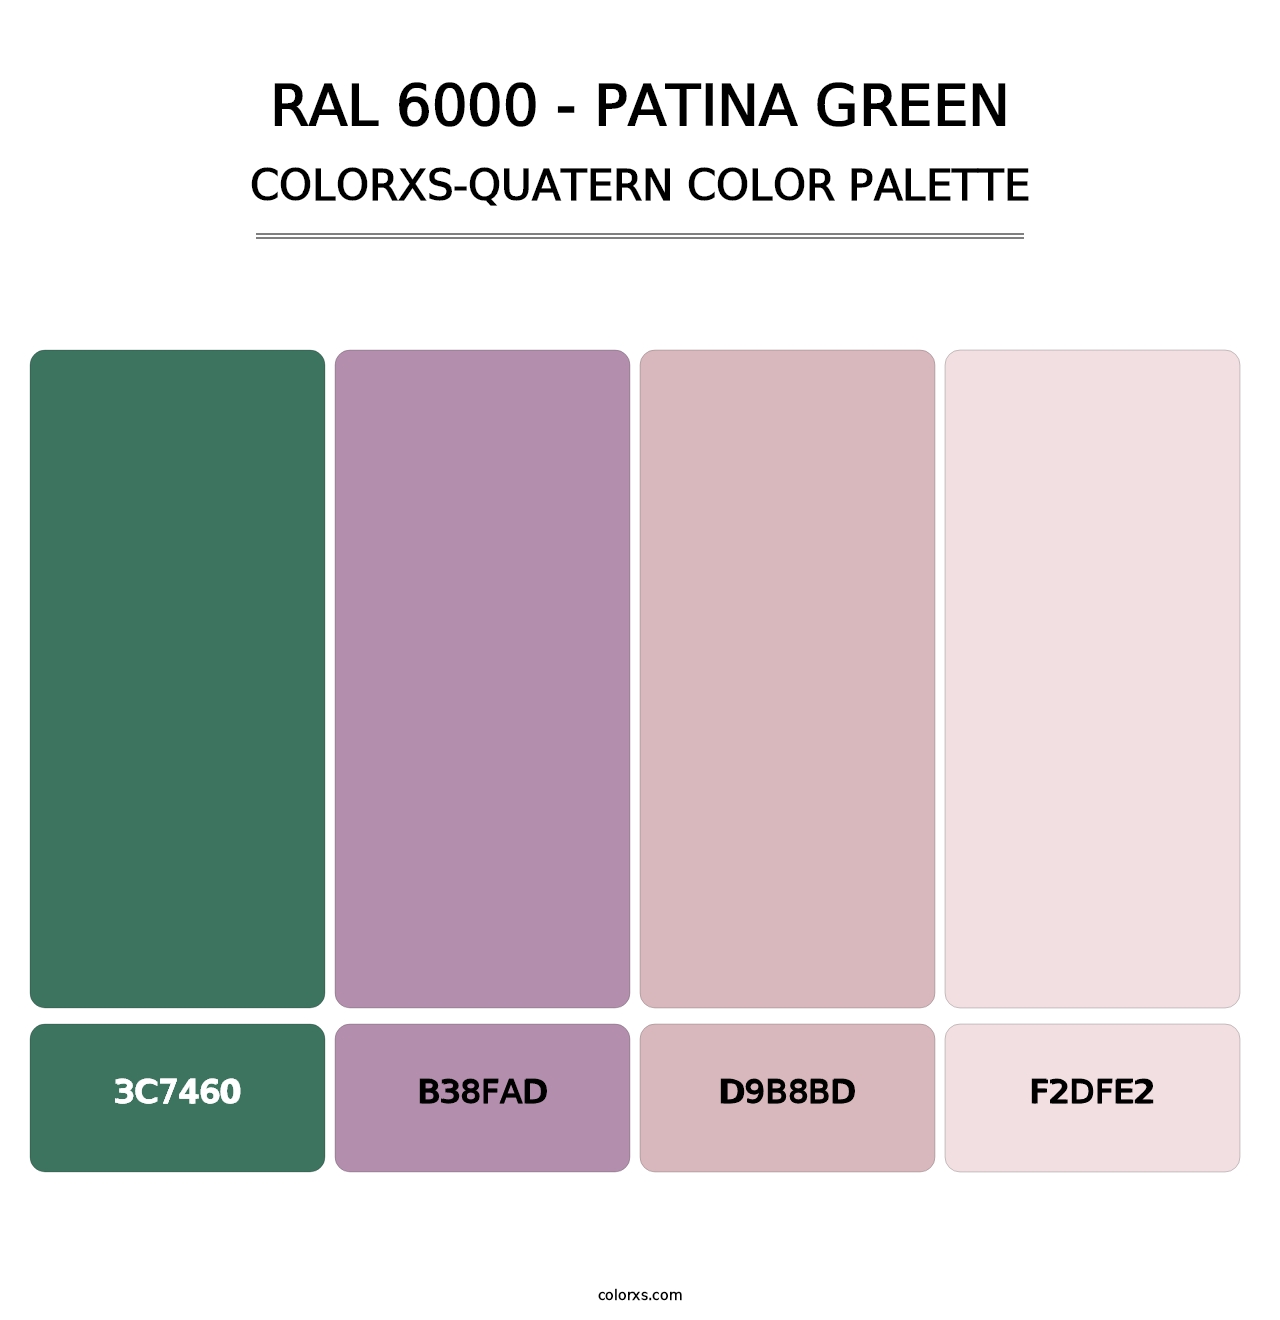 RAL 6000 - Patina Green - Colorxs Quatern Palette